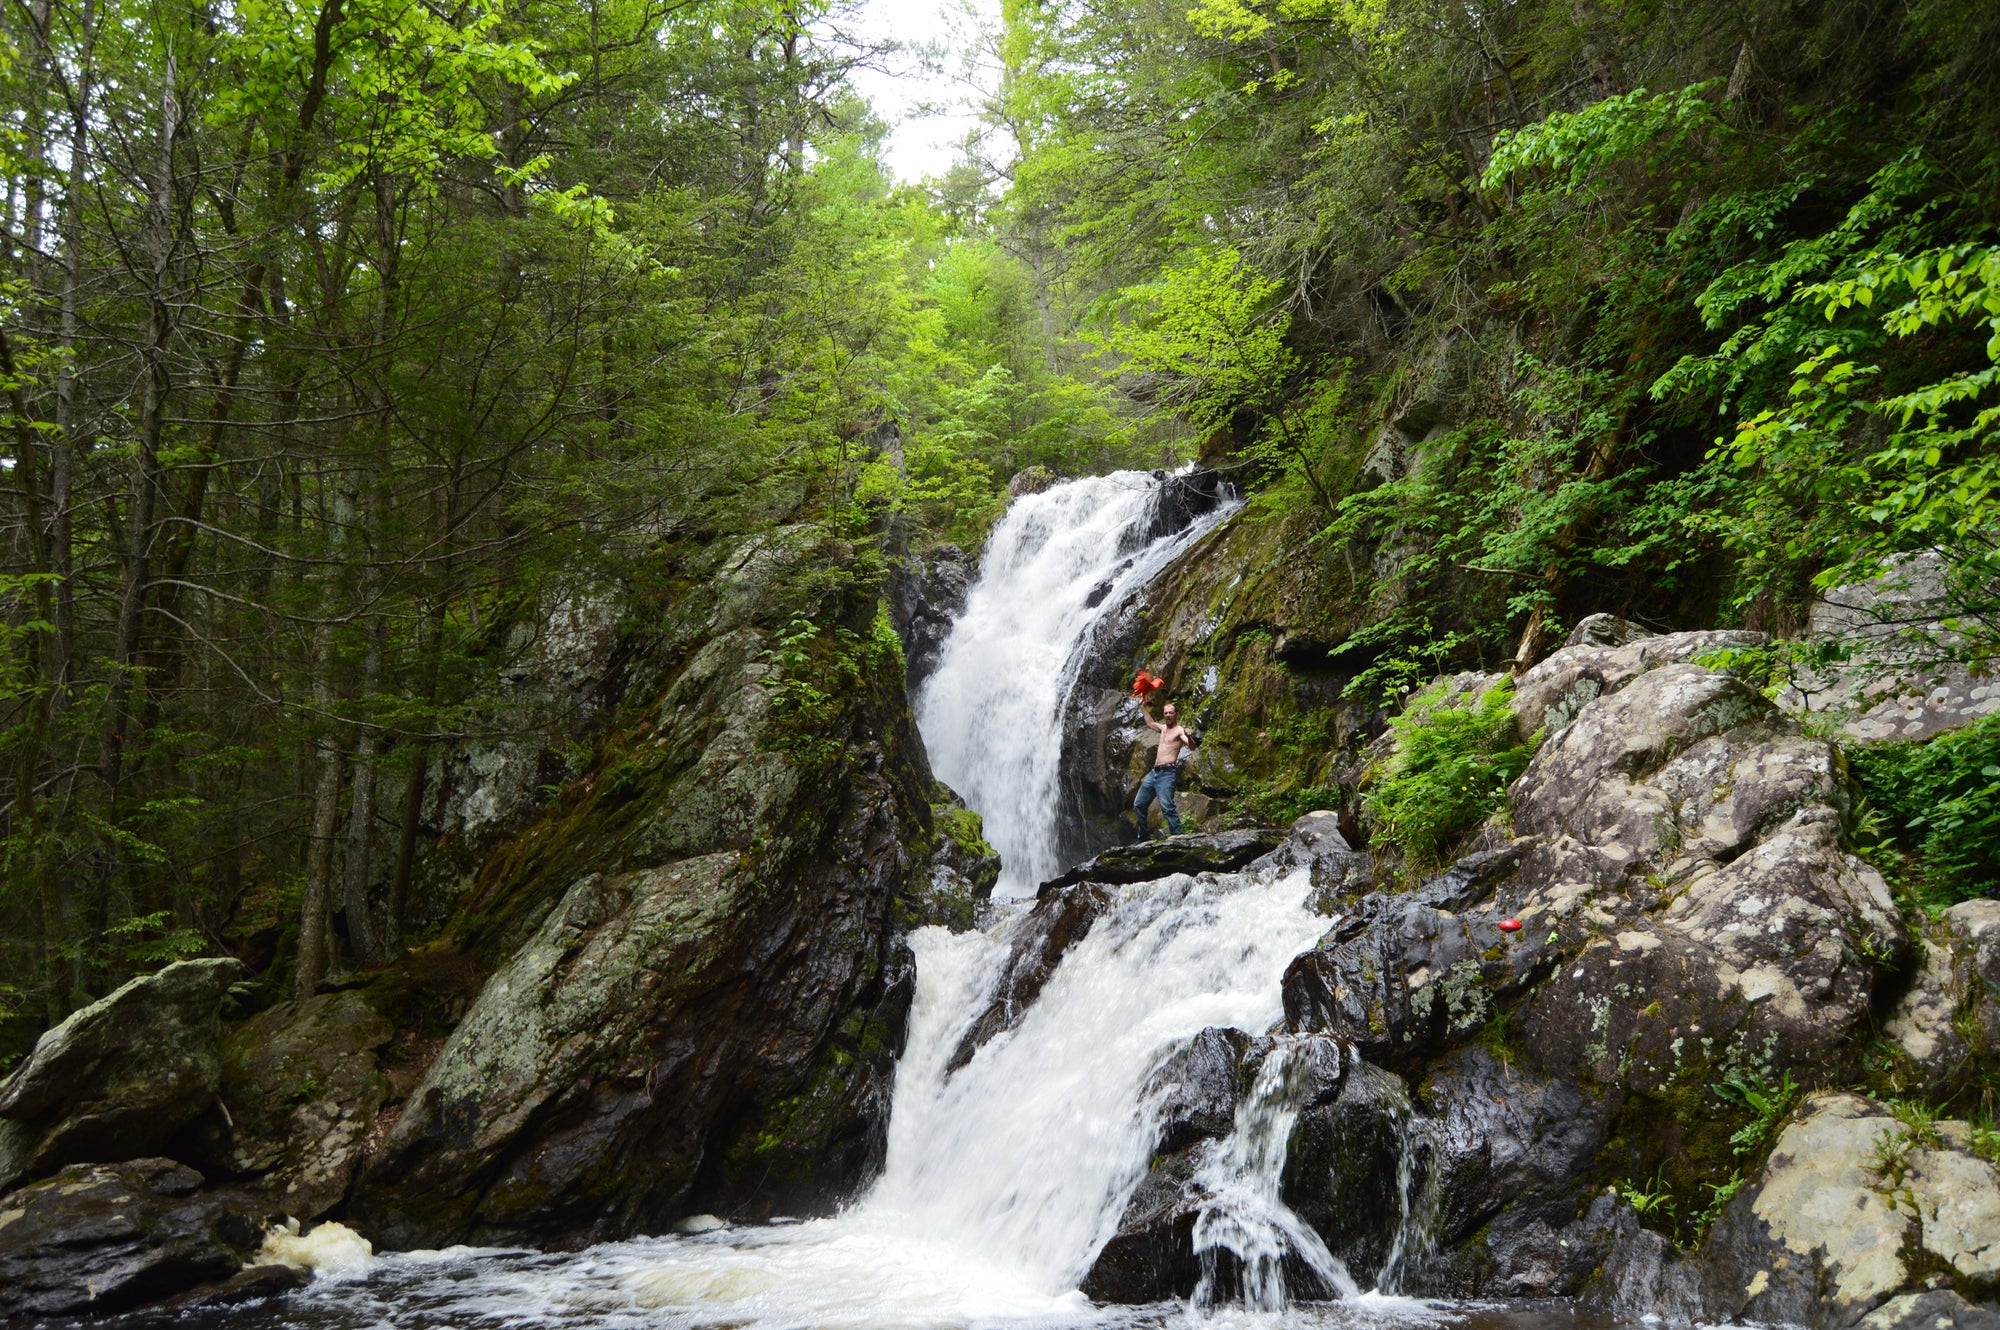 People hike along rocks on the side of a waterfall in the forest.